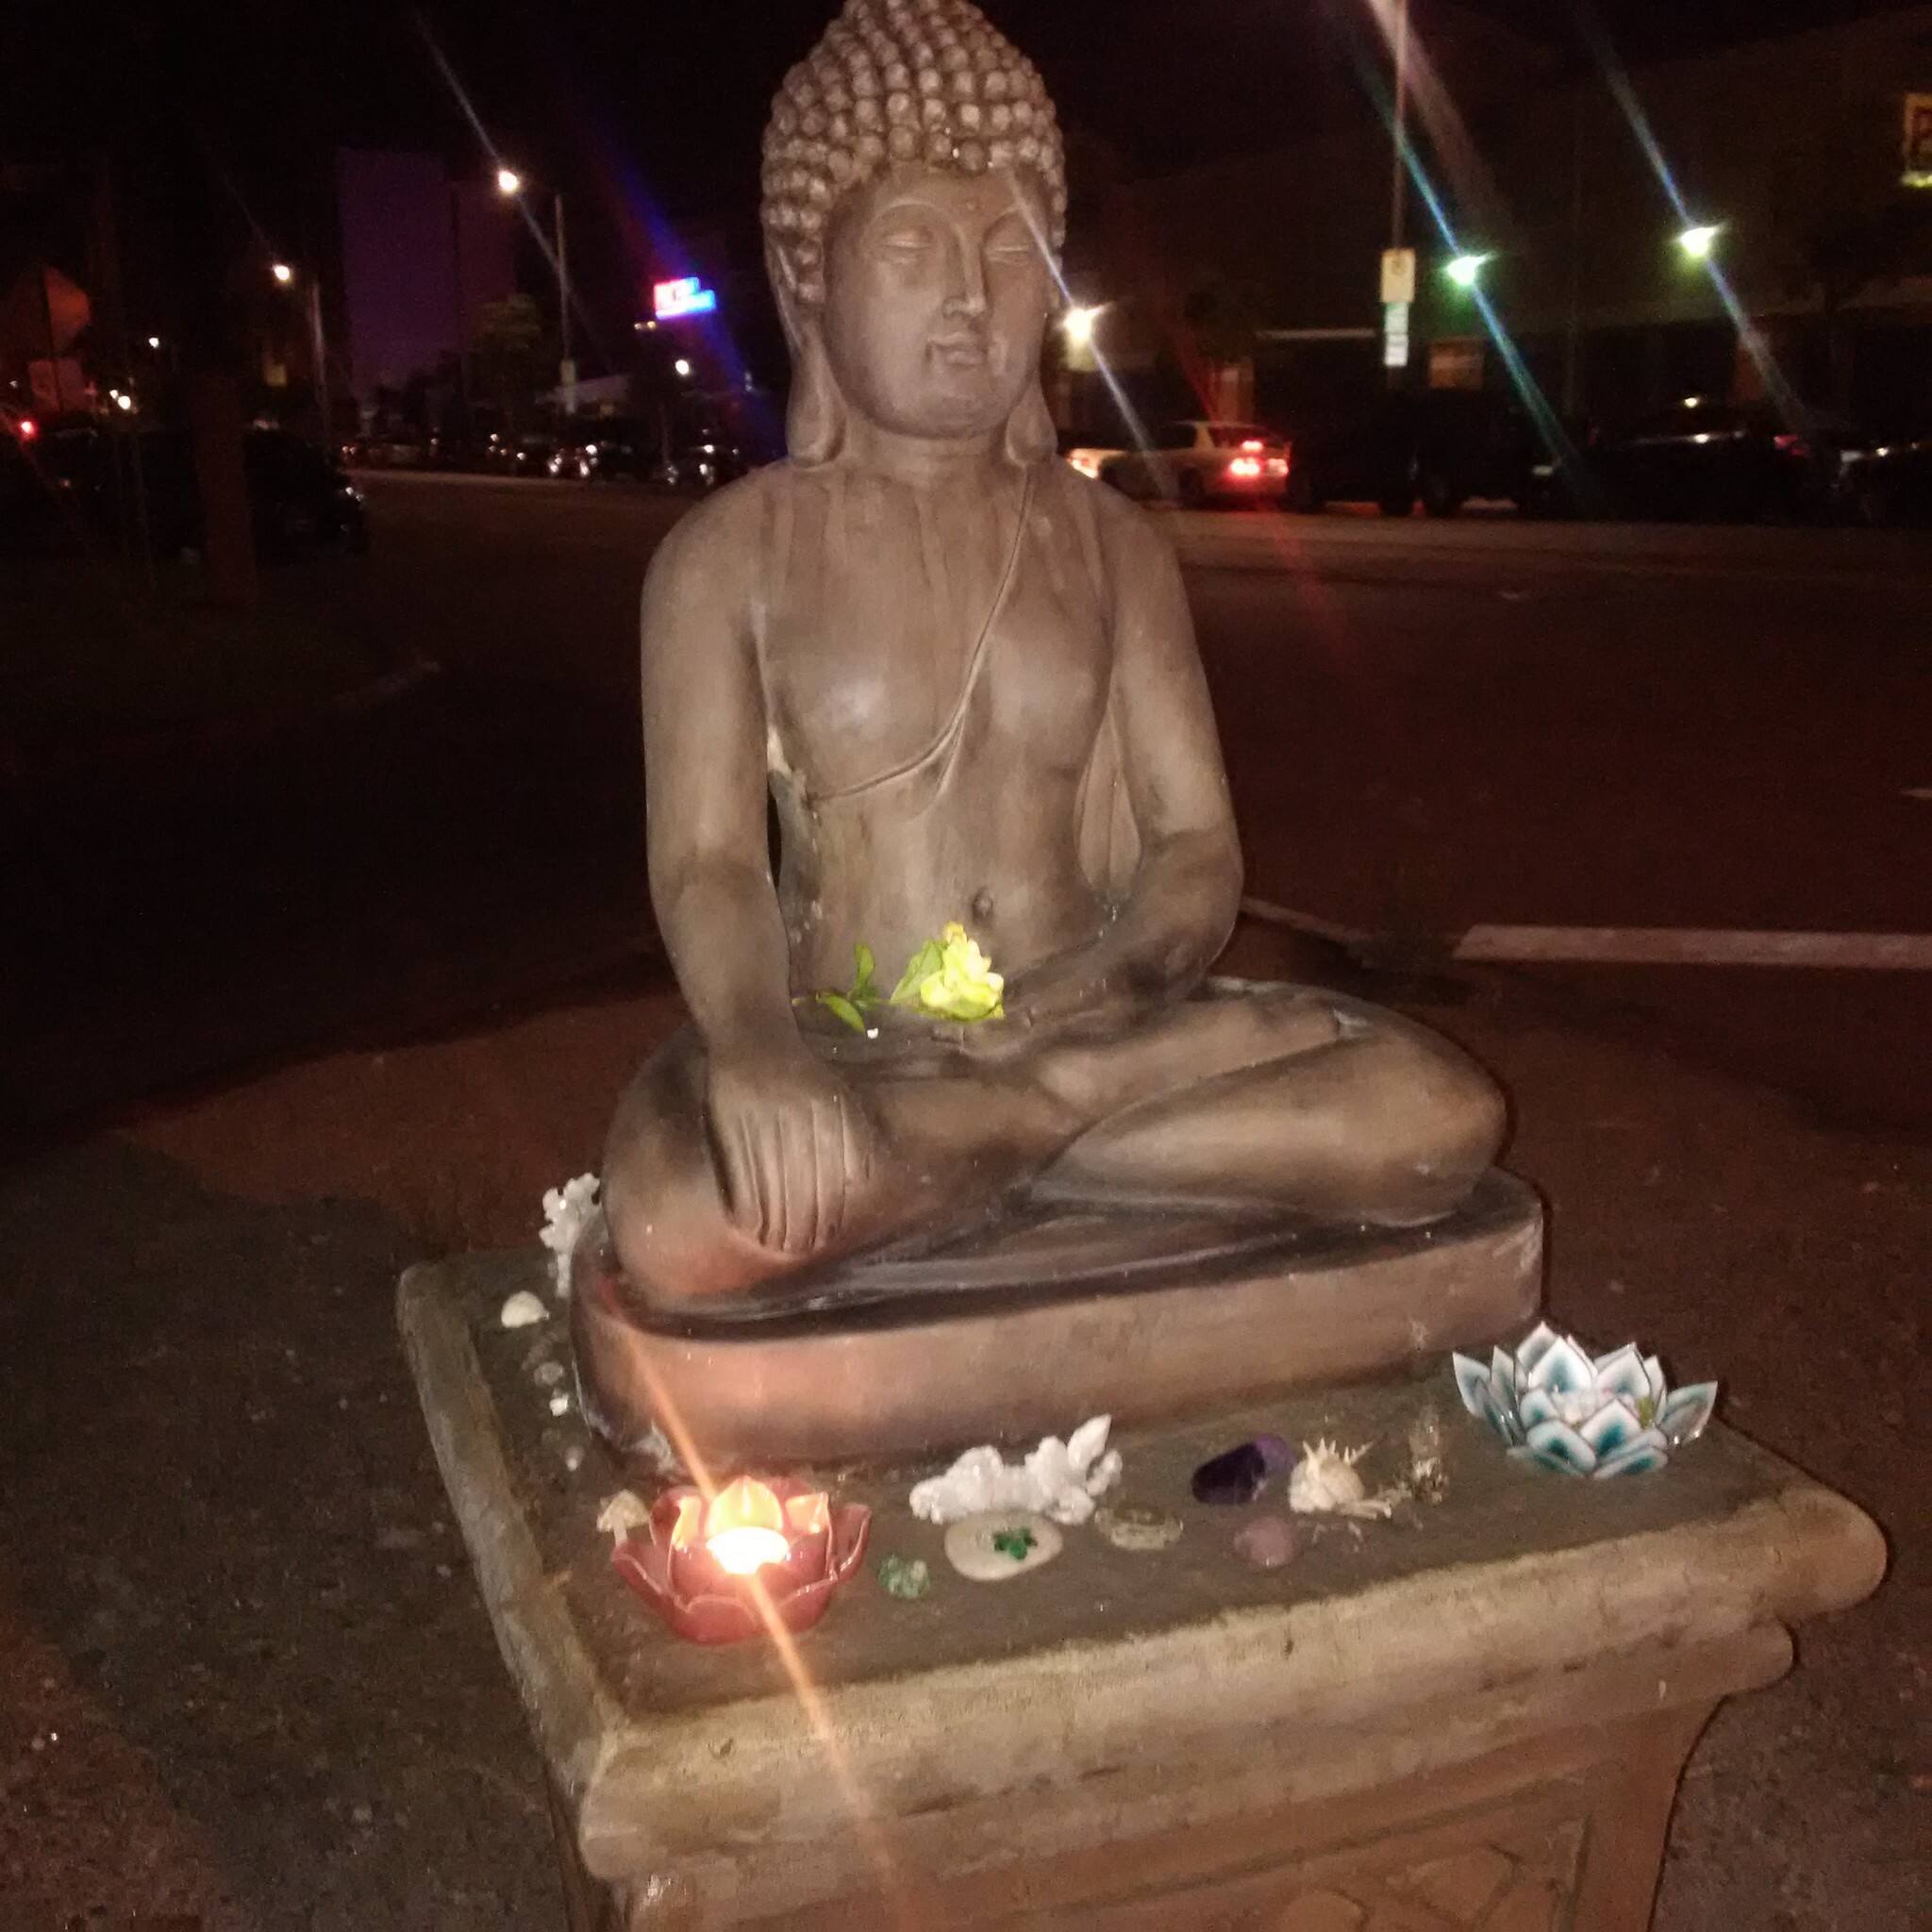 Buddha statue used to stop littering the area vandalised in Los Angeles street